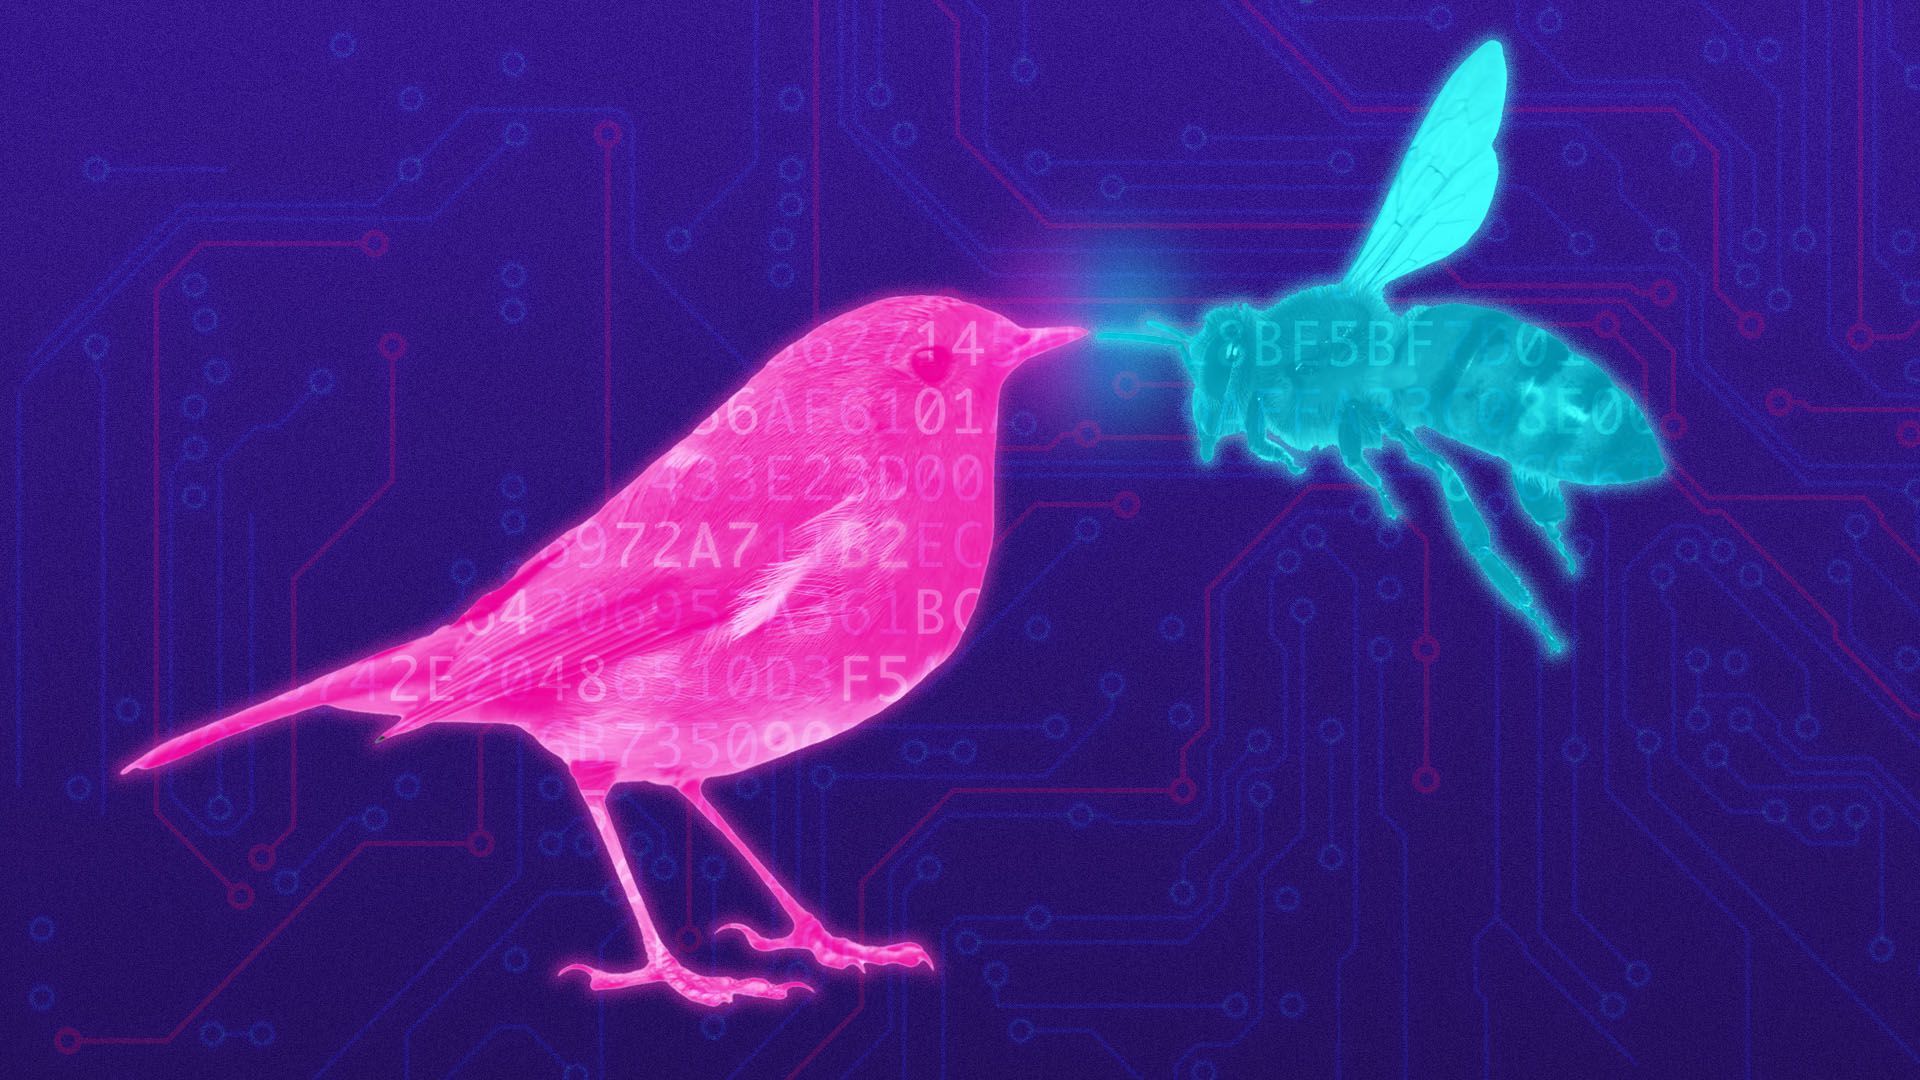 Illustration of a glowing bird and a bee with coding overlay